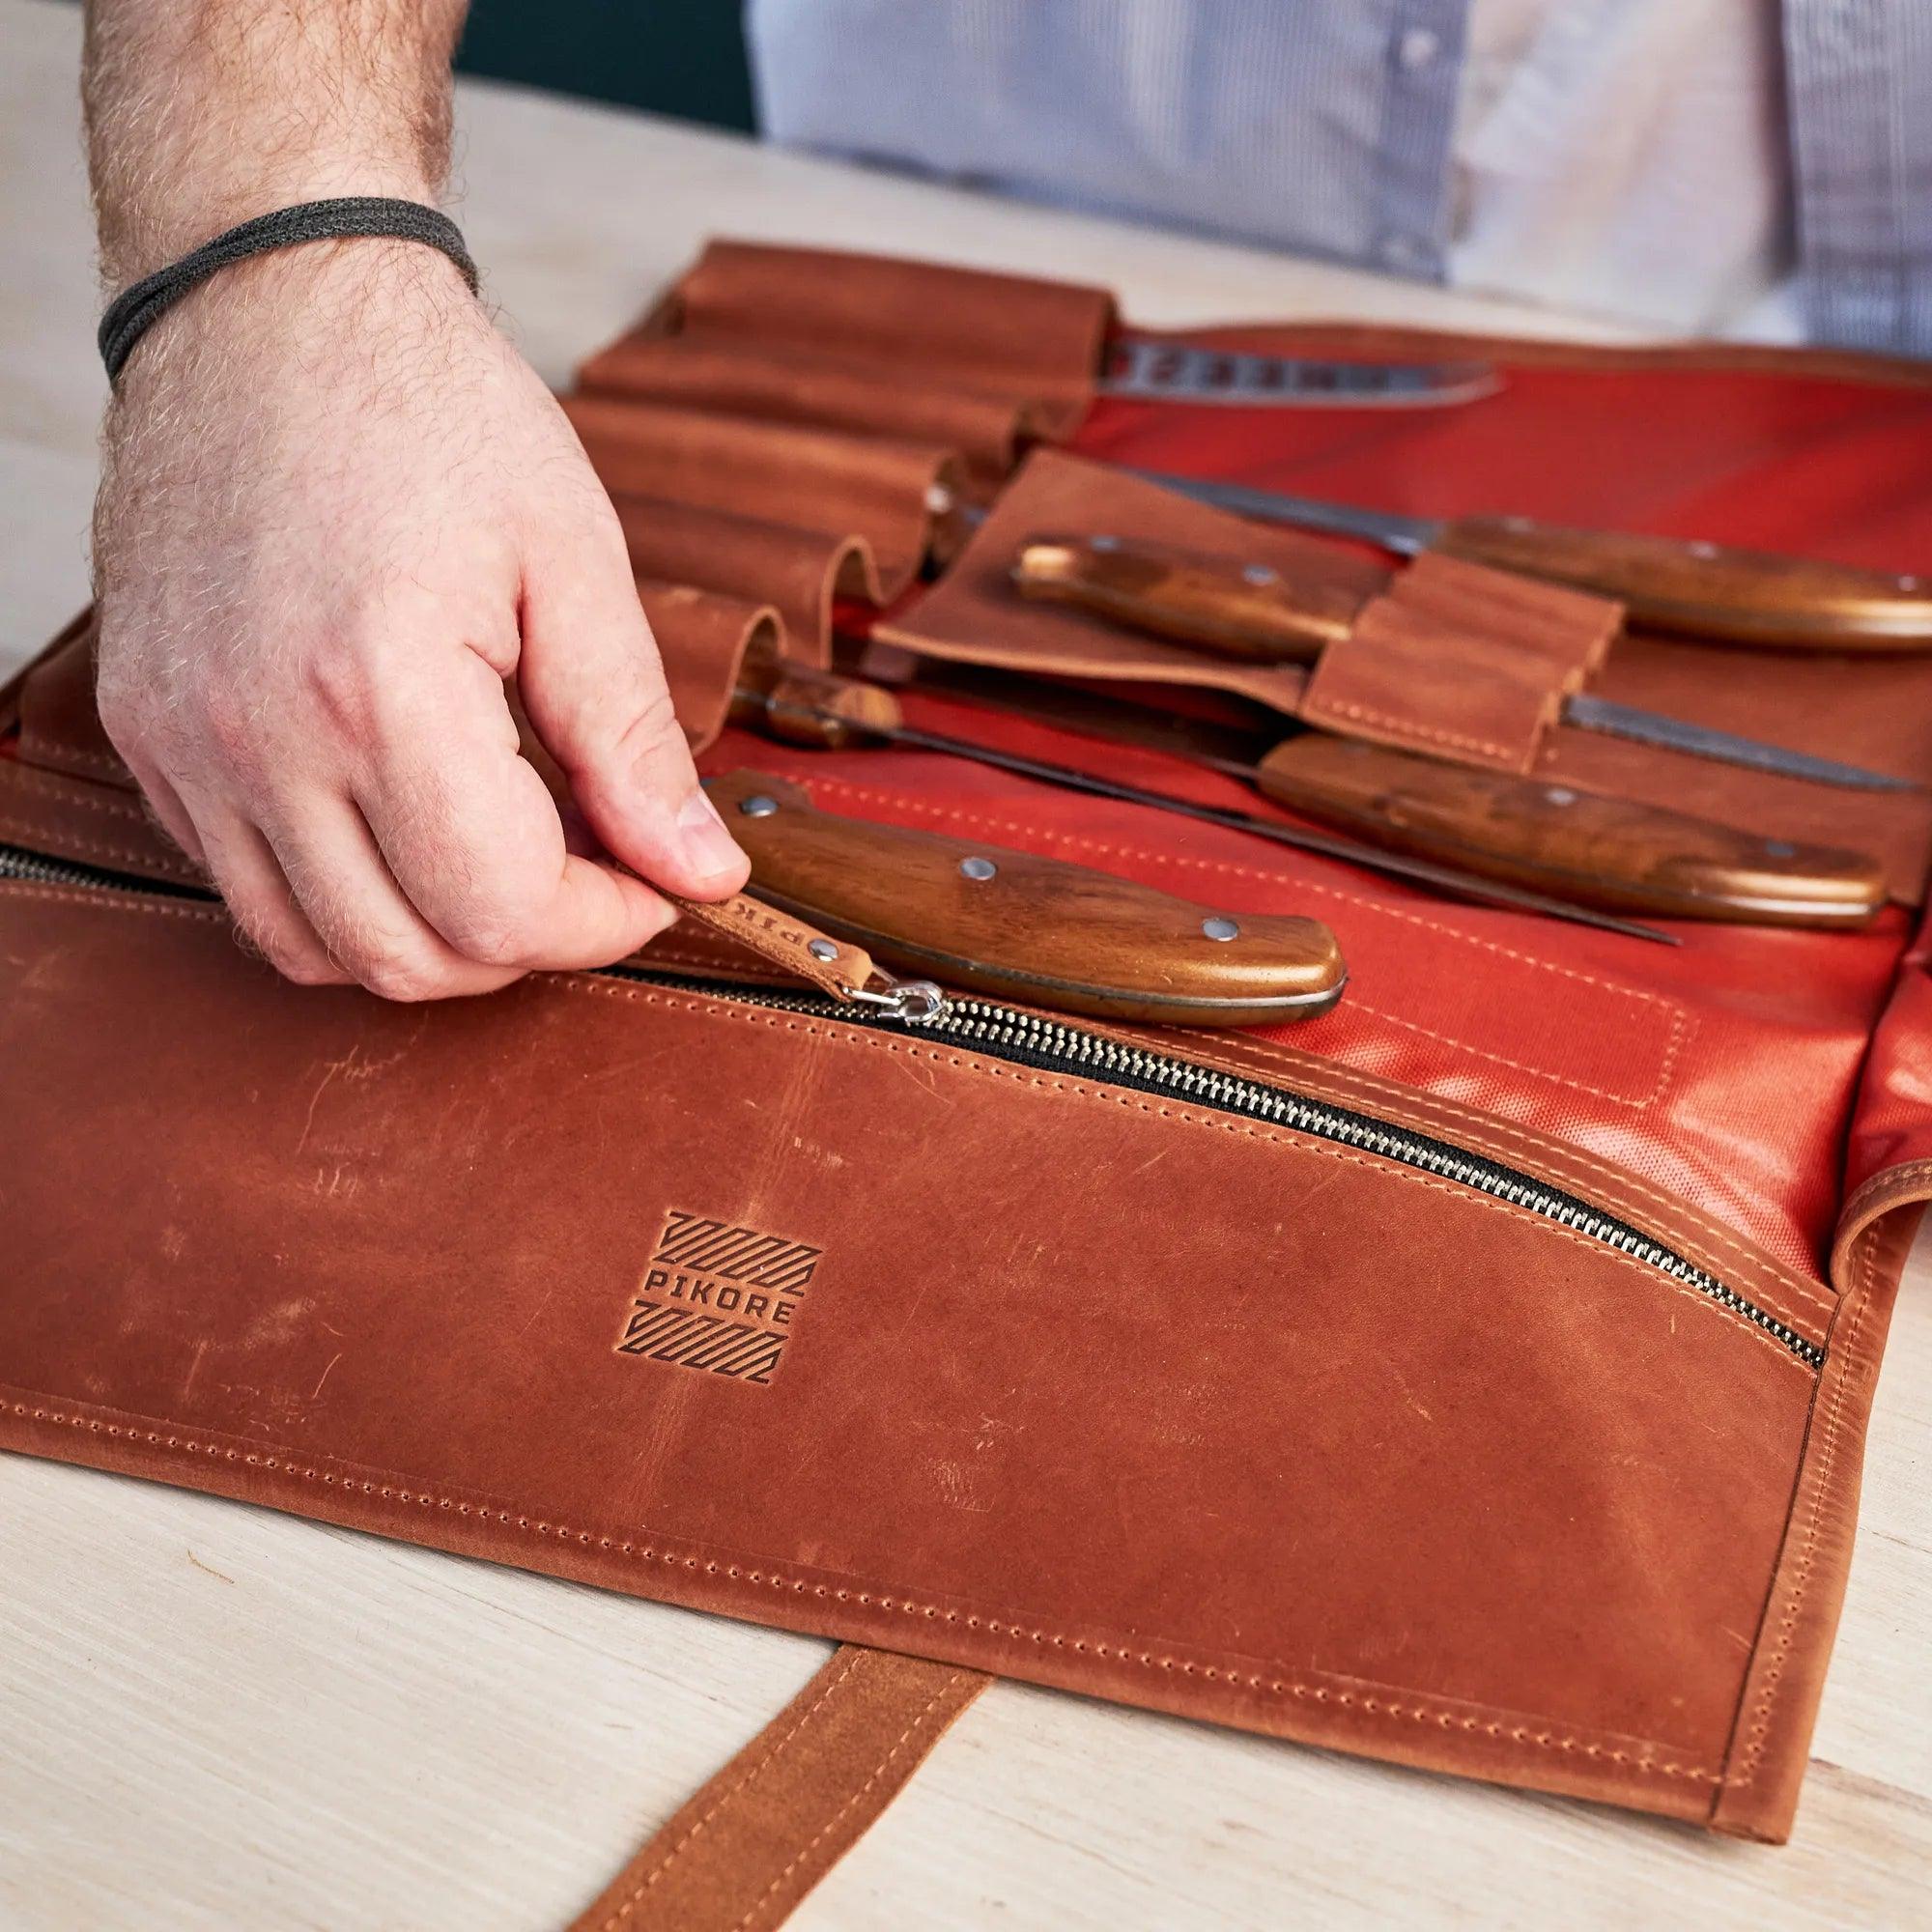 Leather BBQ Knife Roll Bag (6 slots)